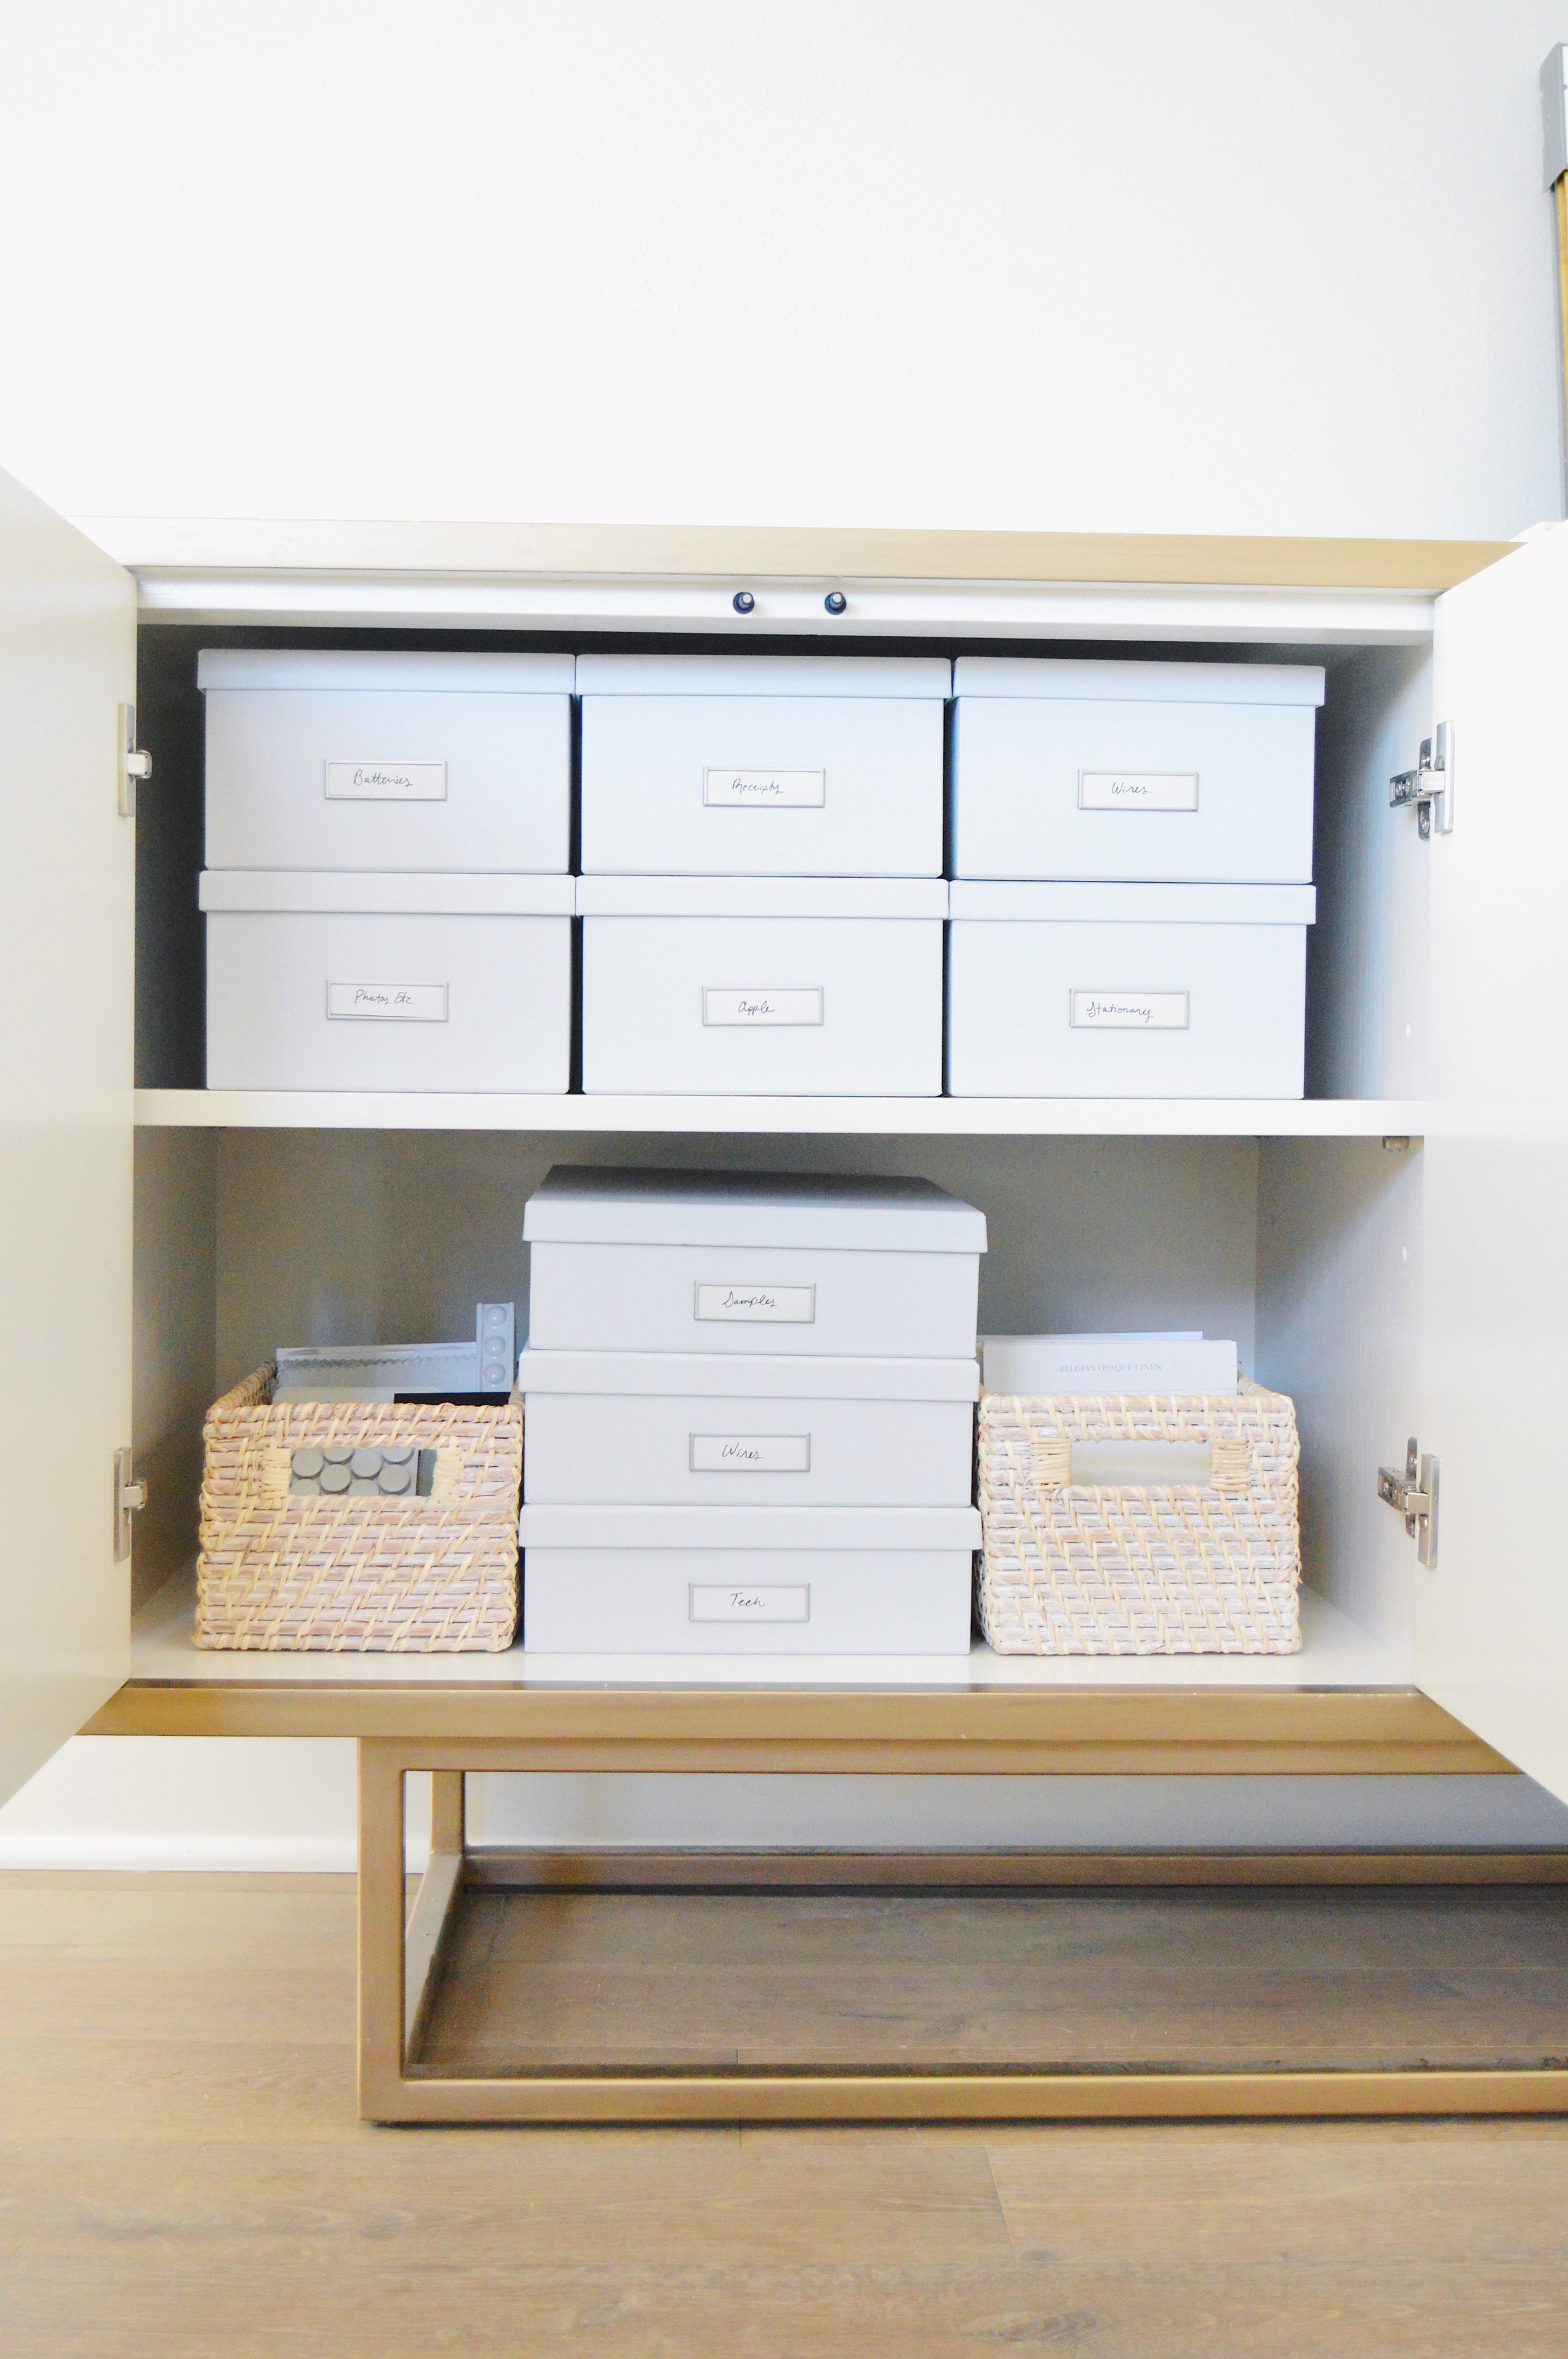  In our Living Room, I used lidded grey boxes to store things like batteries, apple accessories, tech stuff - you name it! I used handled rattan bins to store the samples I’ve been collecting since beginning our renovation.  